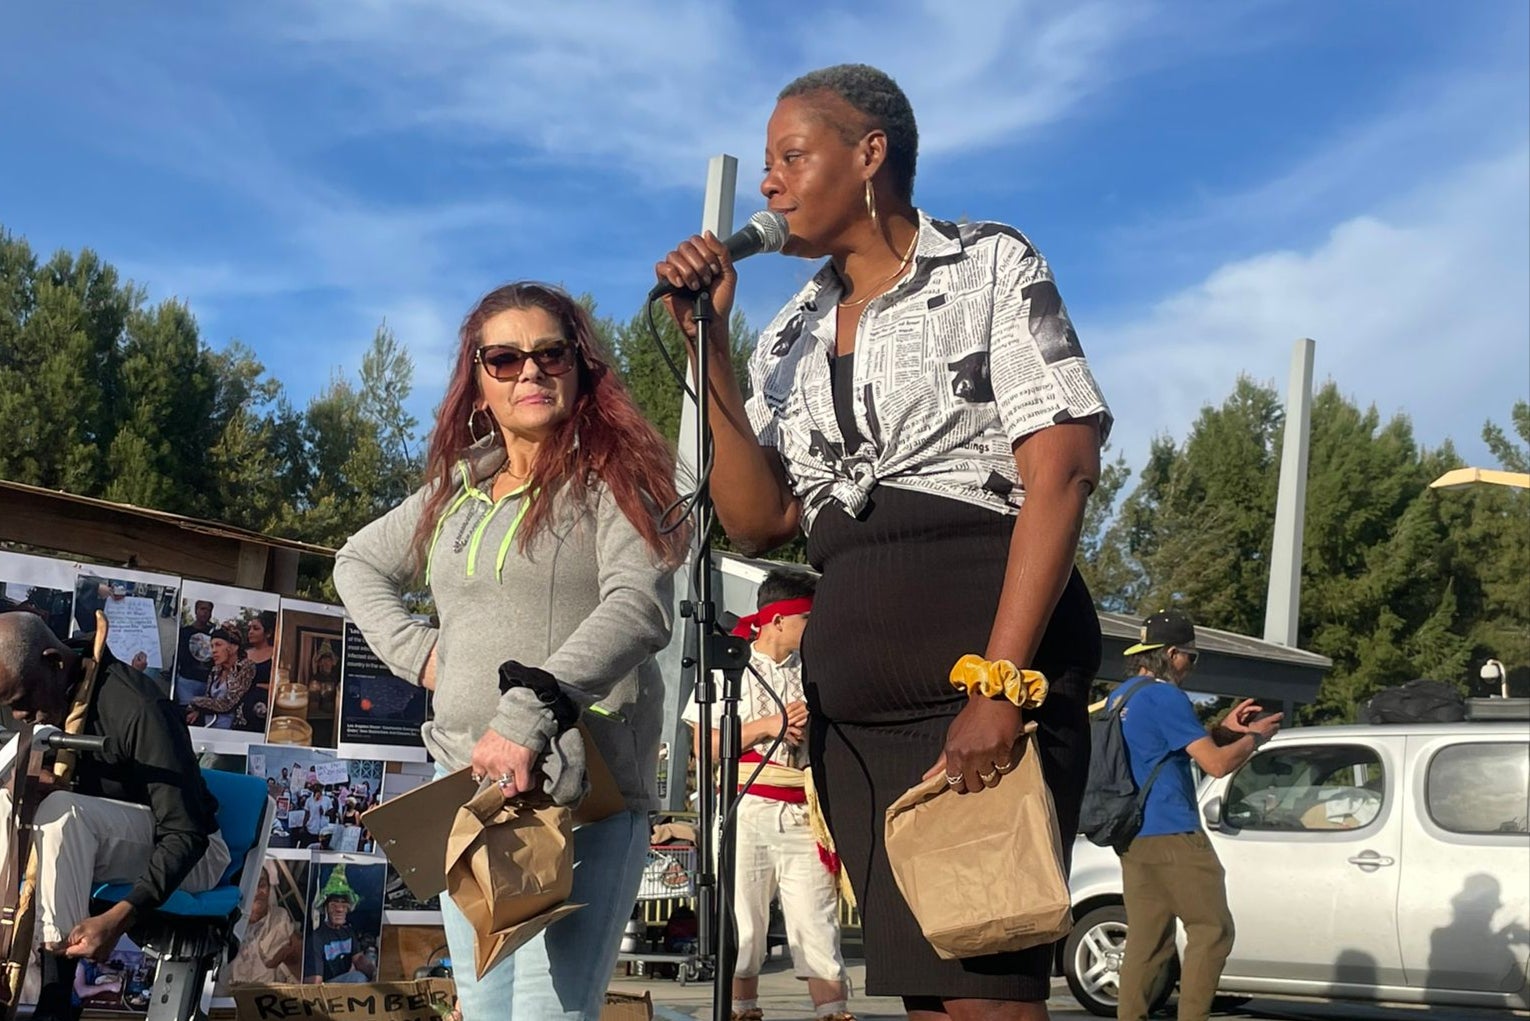 Van Nuys homeless community members Kookie (left) and Jelly (right) speak at a memorial event for their frriends